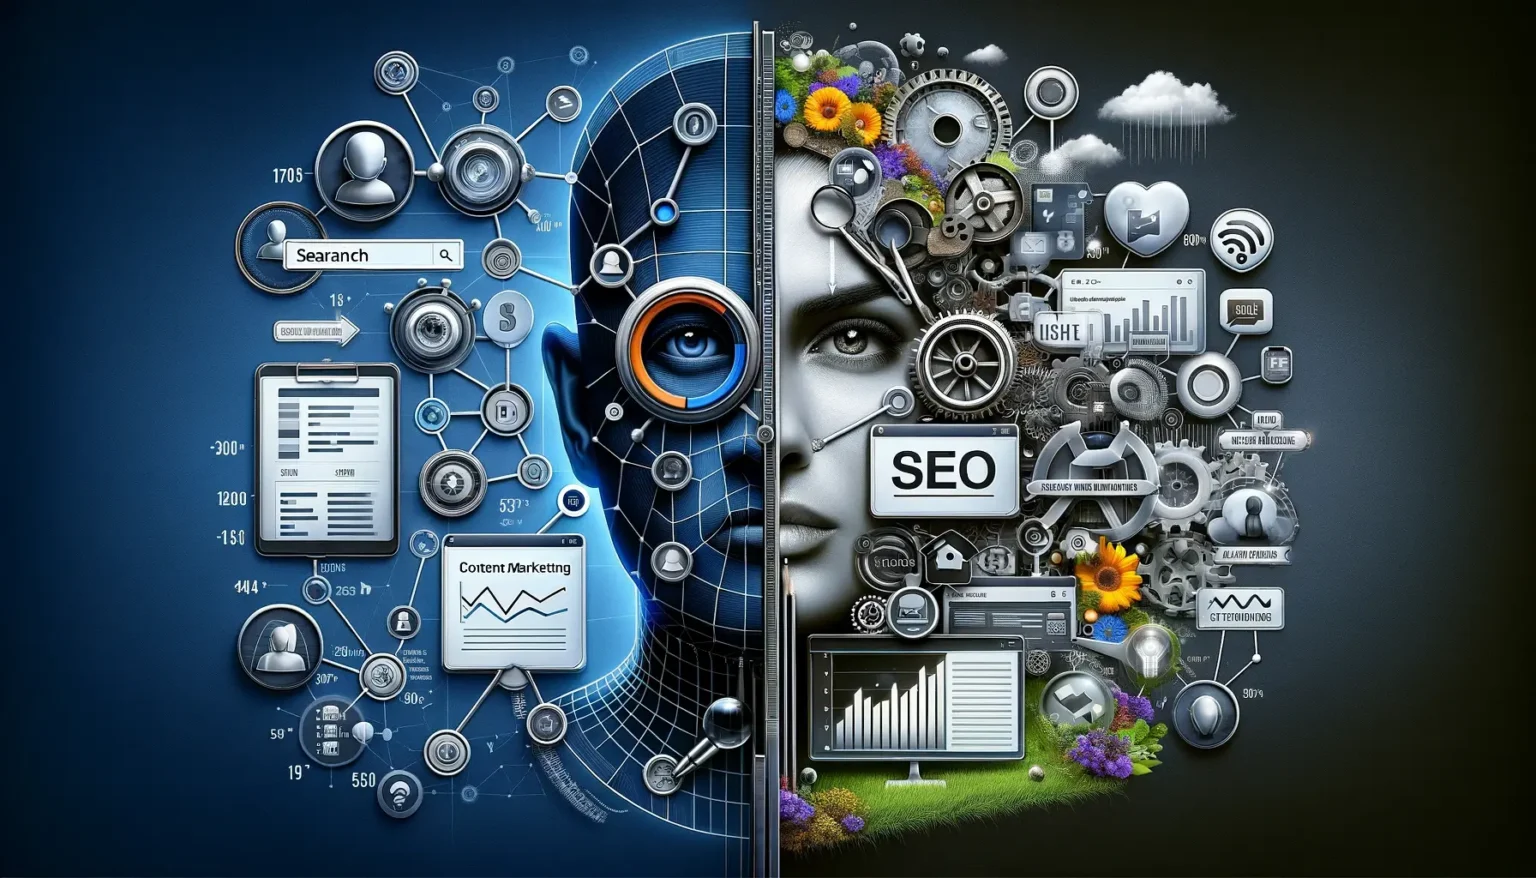 SEO and content marketing